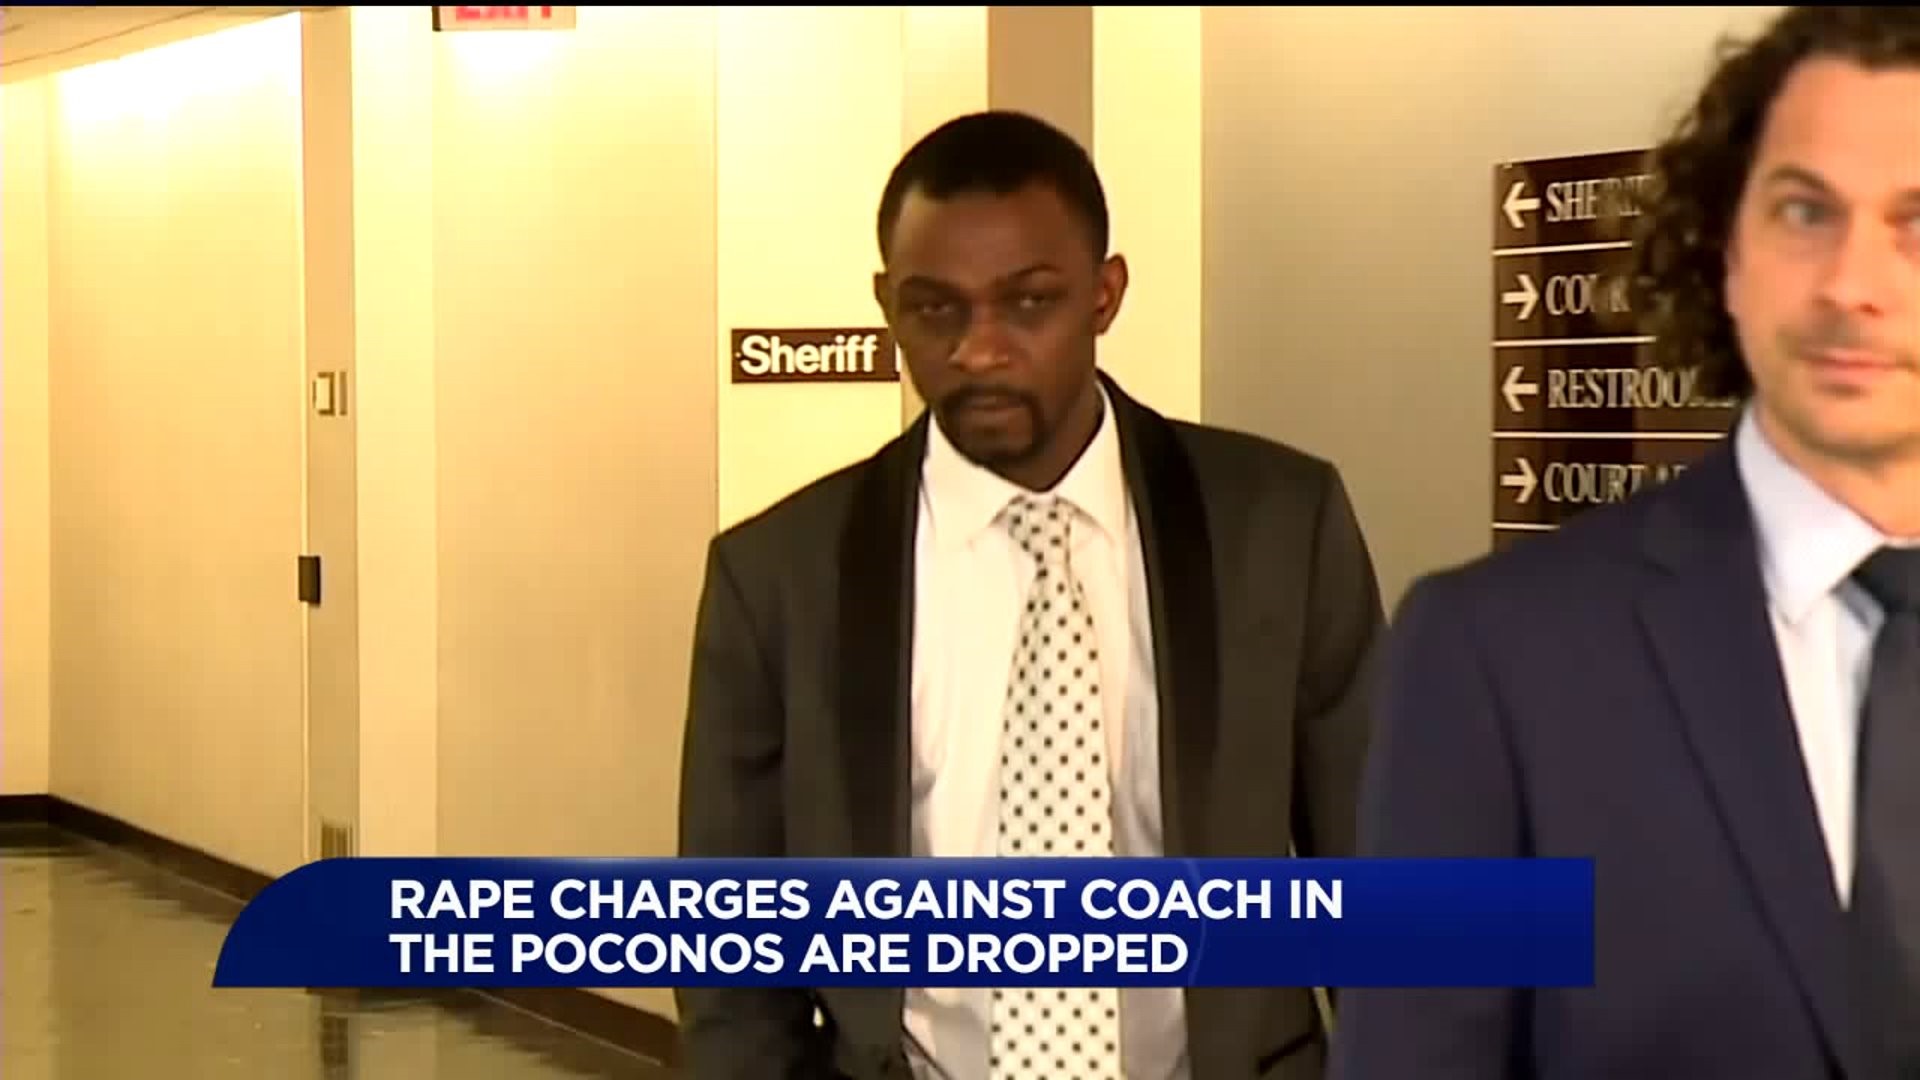 Rape Charges Against Coach in the Poconos Dropped